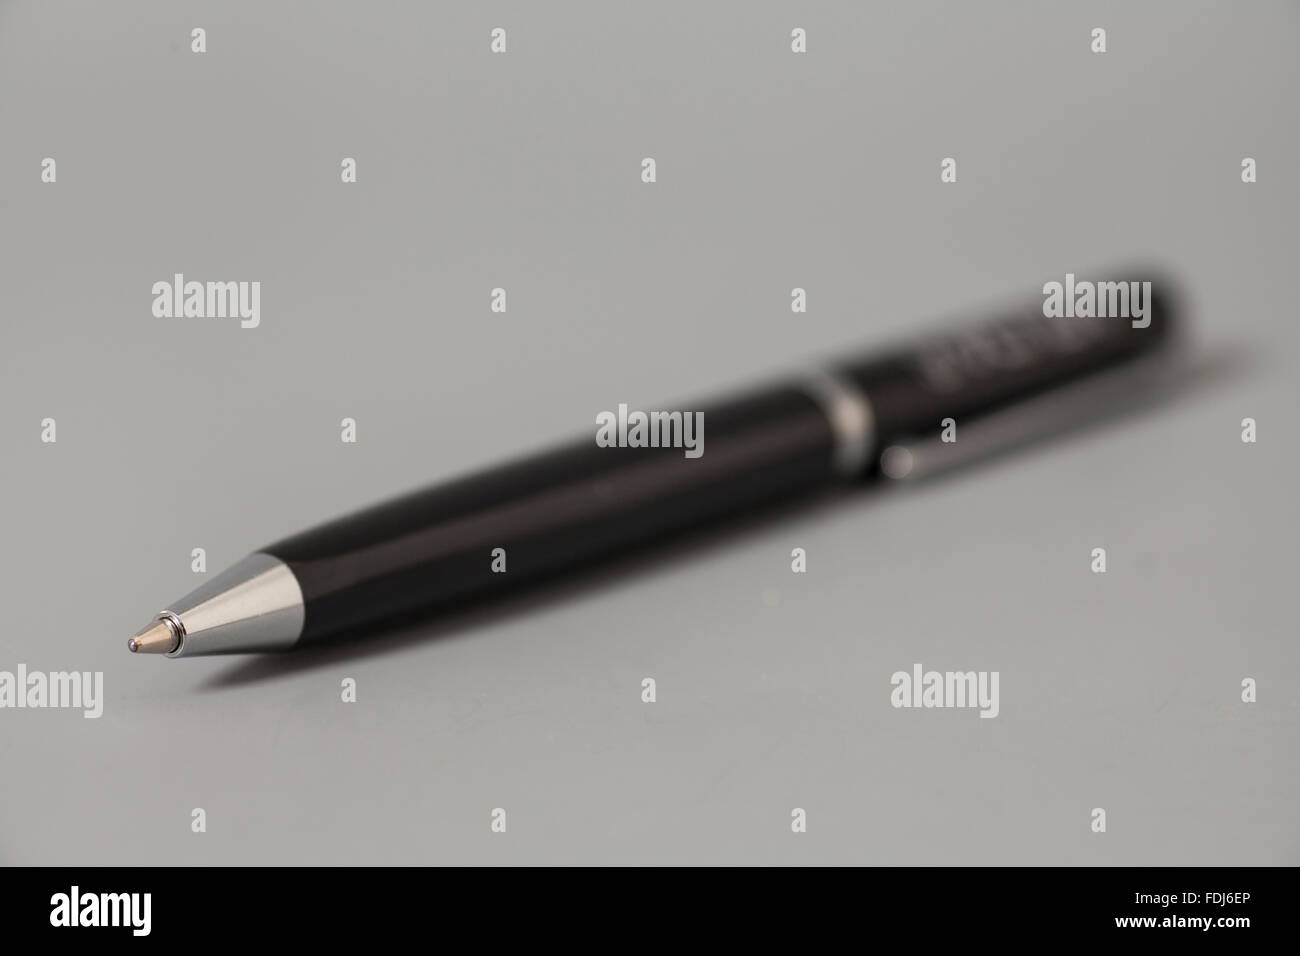 Ball point pen  on gray background Stock Photo